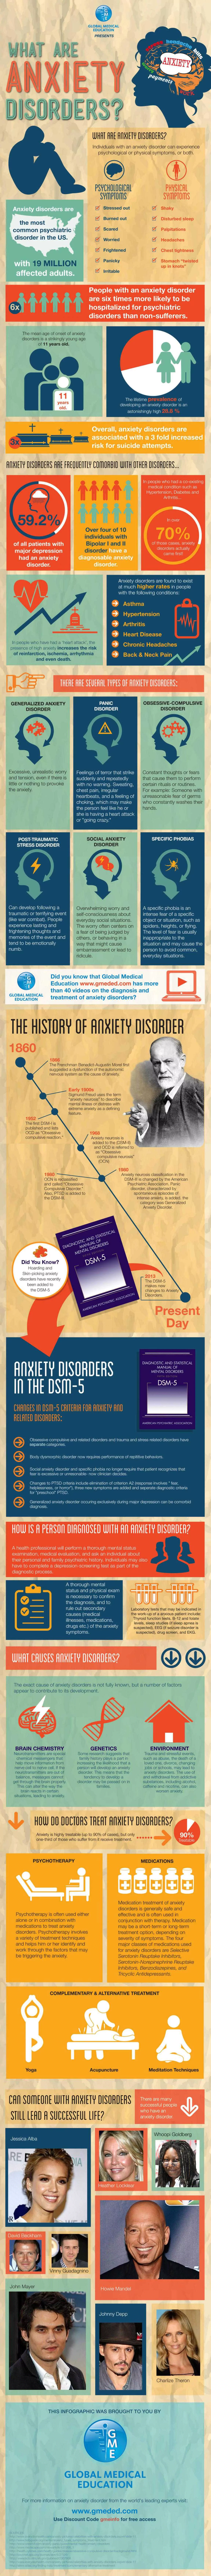 What Are Anxiety Disorders